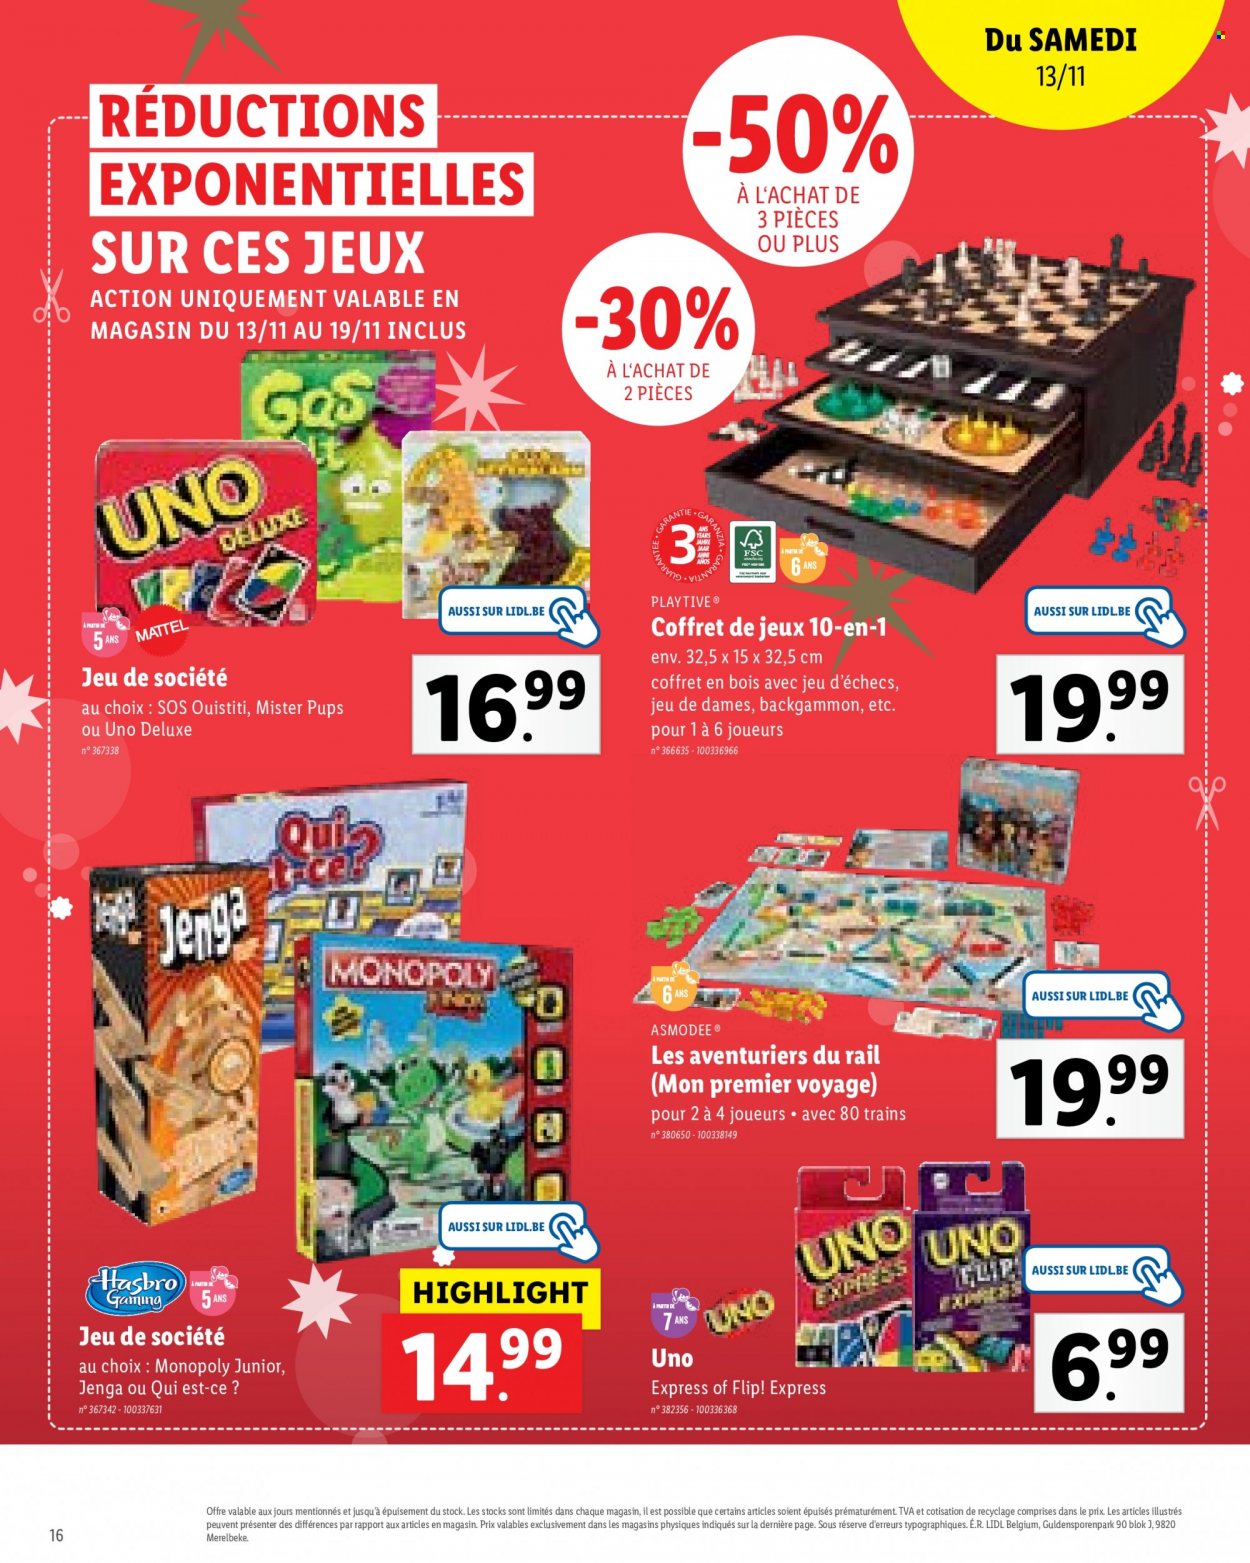 Catalogue Lidl - 25.10.2021 - 30.11.2021. Page 16.